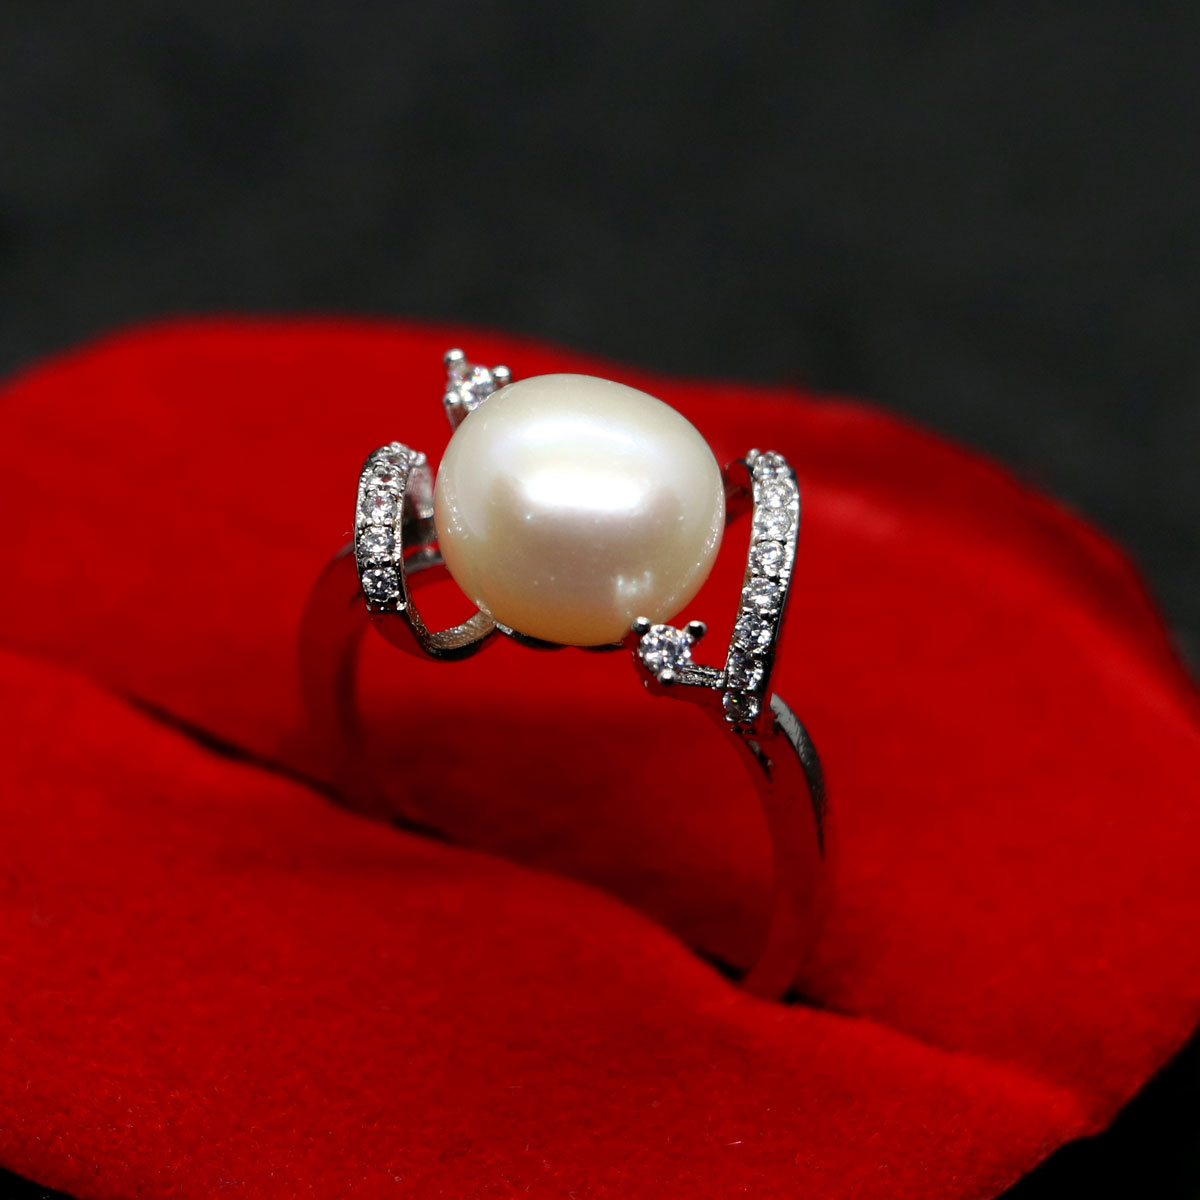 Benefits Of Wearing A Pearl. Read On To Find Out - KalingaTV